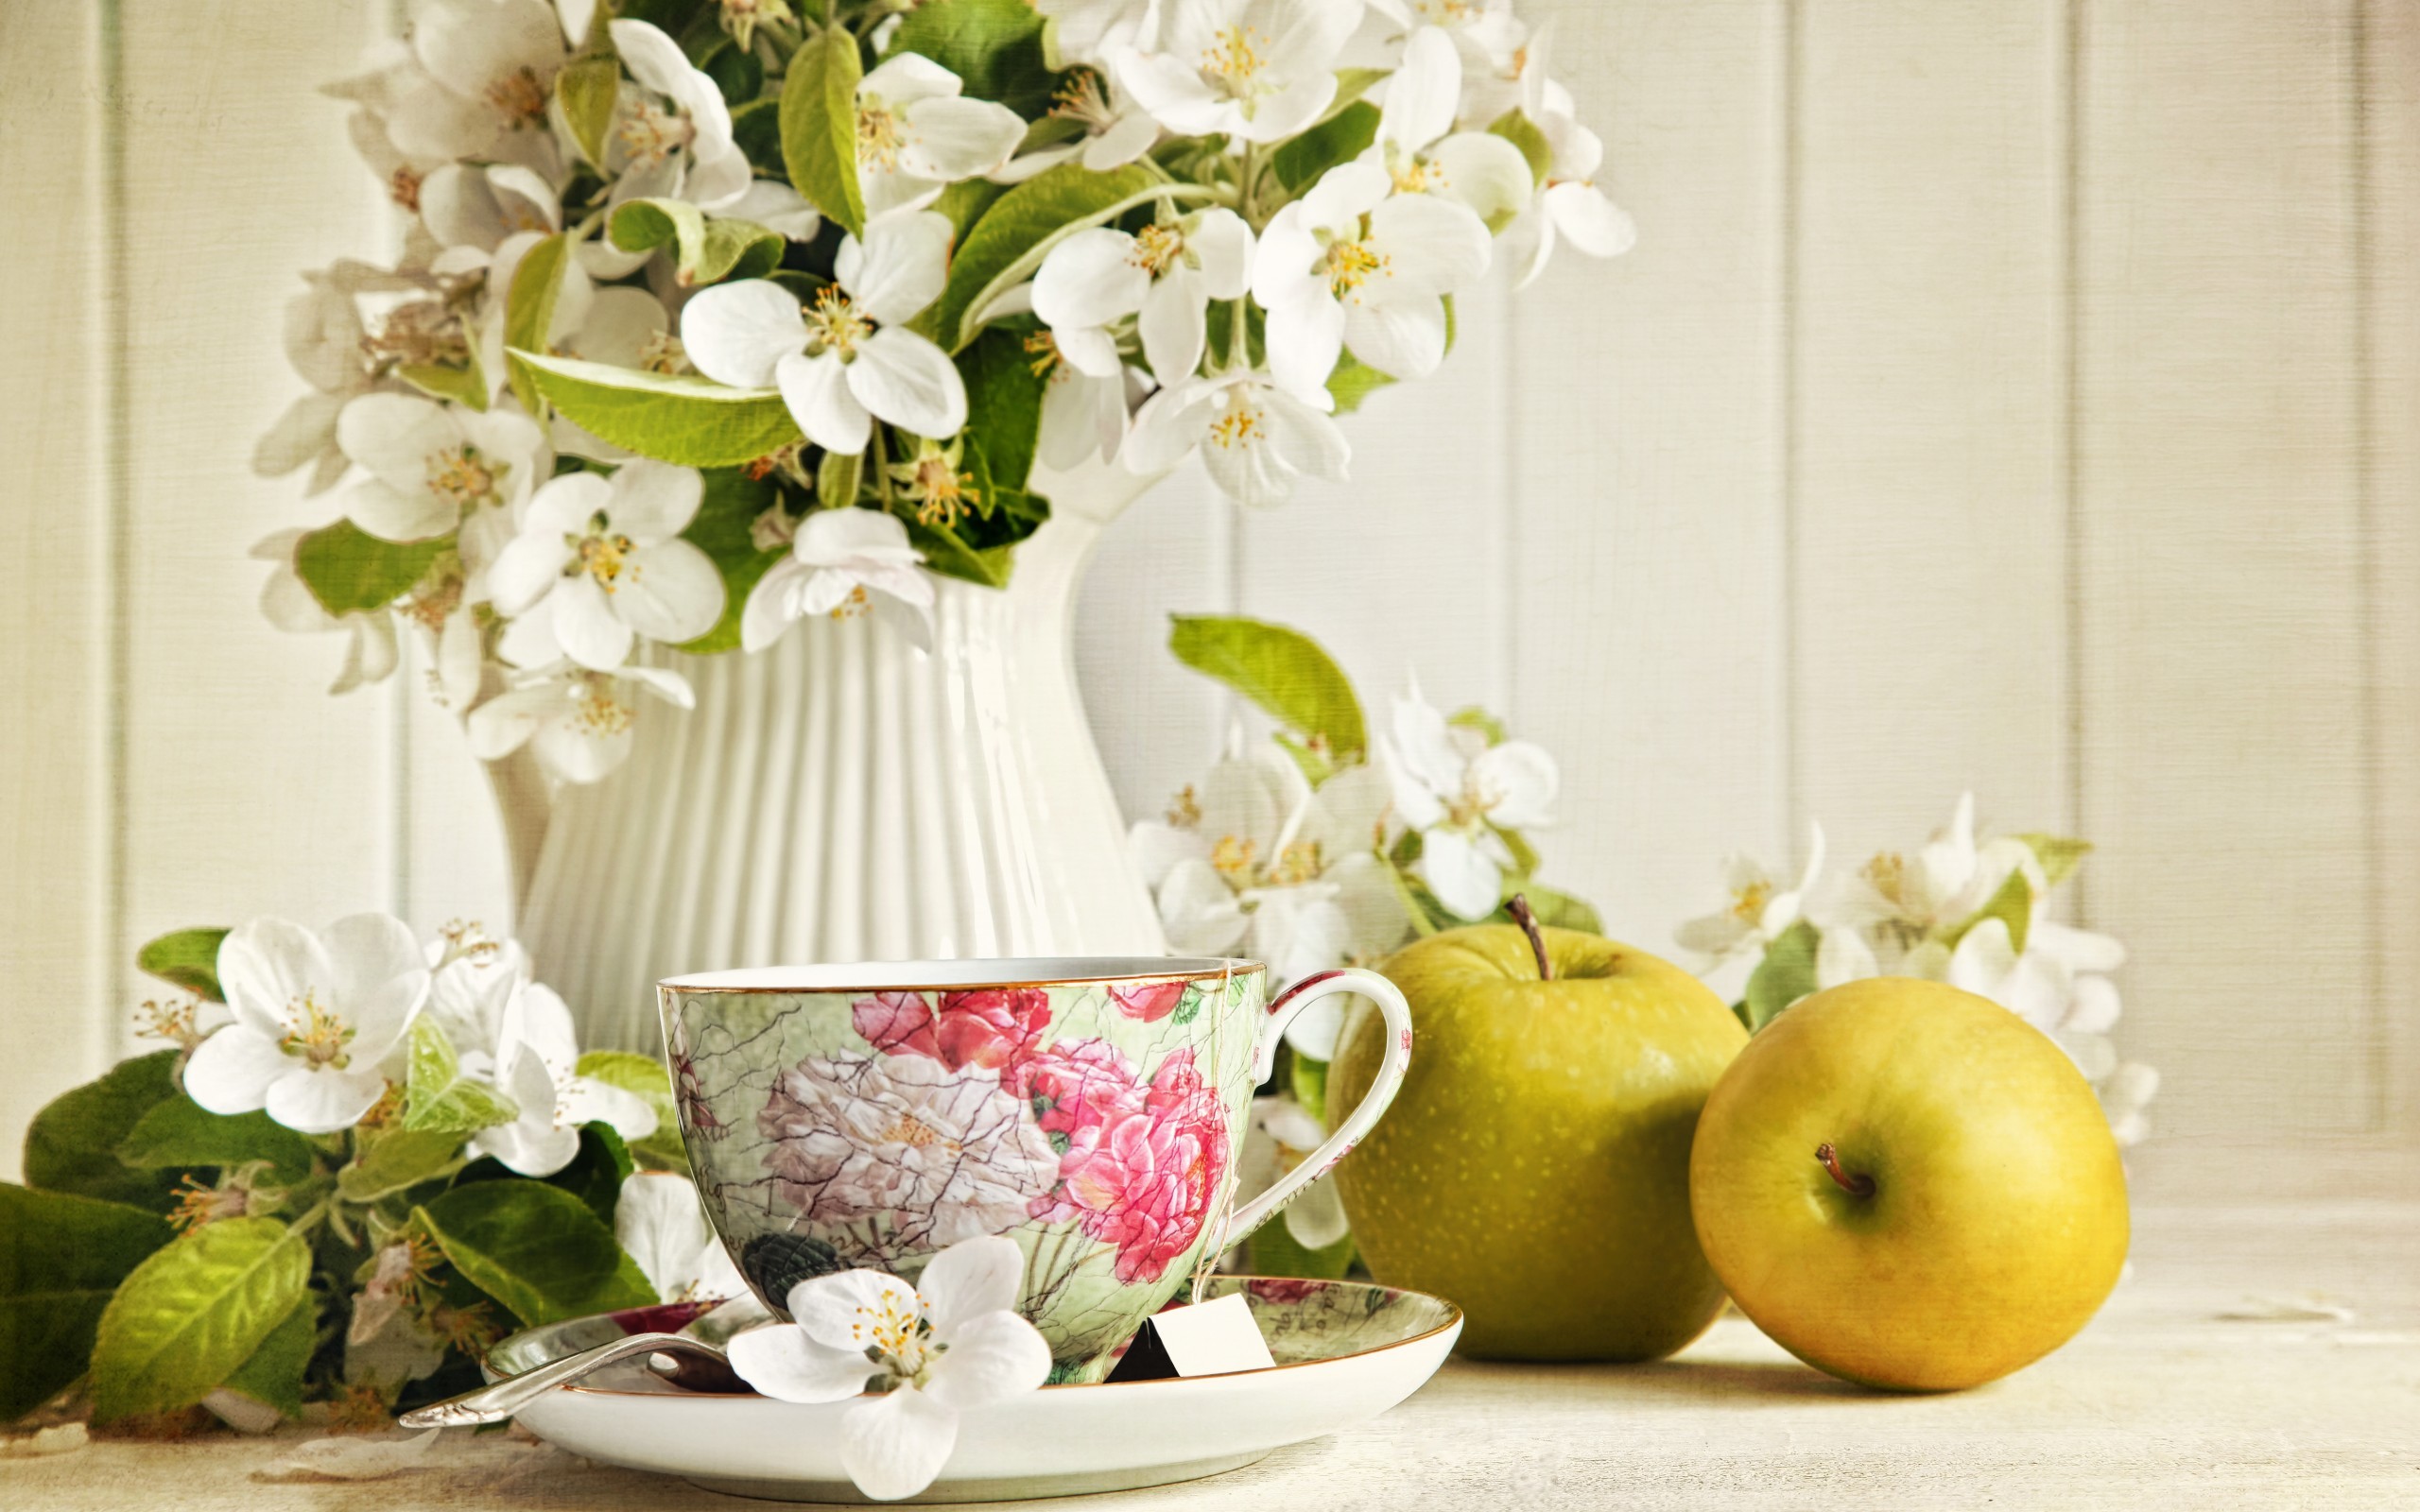 bouquets, plants, flowers, apples, cups, still life, yellow Aesthetic wallpaper